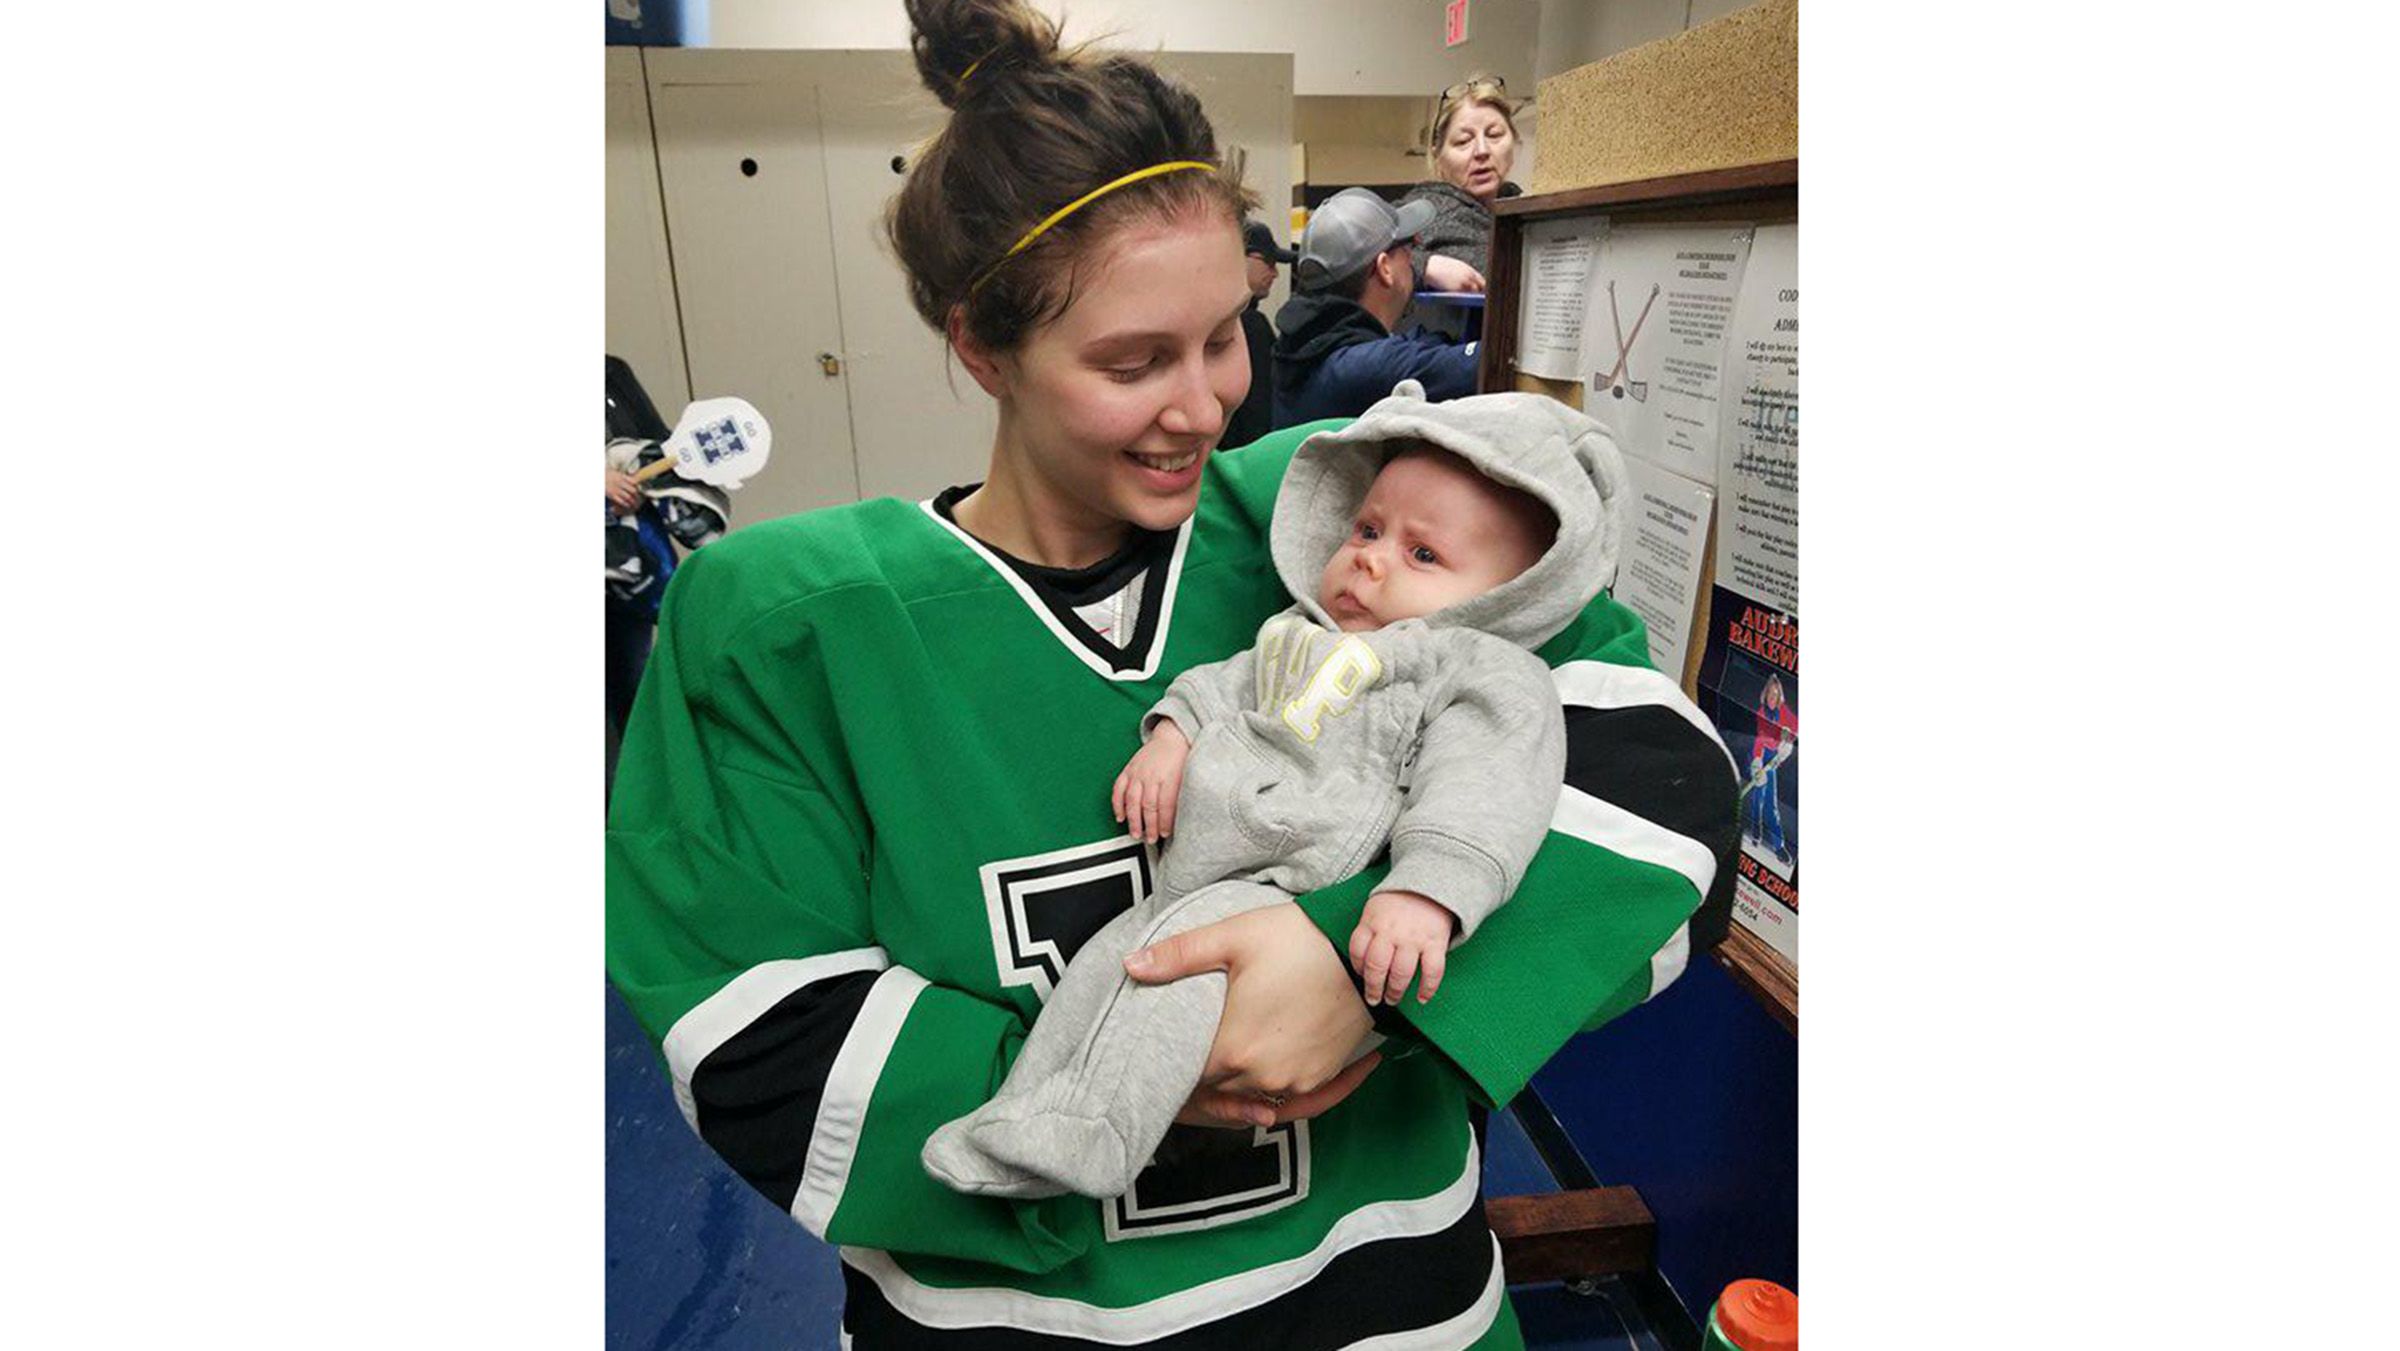 This Mom Who Breastfed At Her Own Hockey Game Is Canada's New Hero